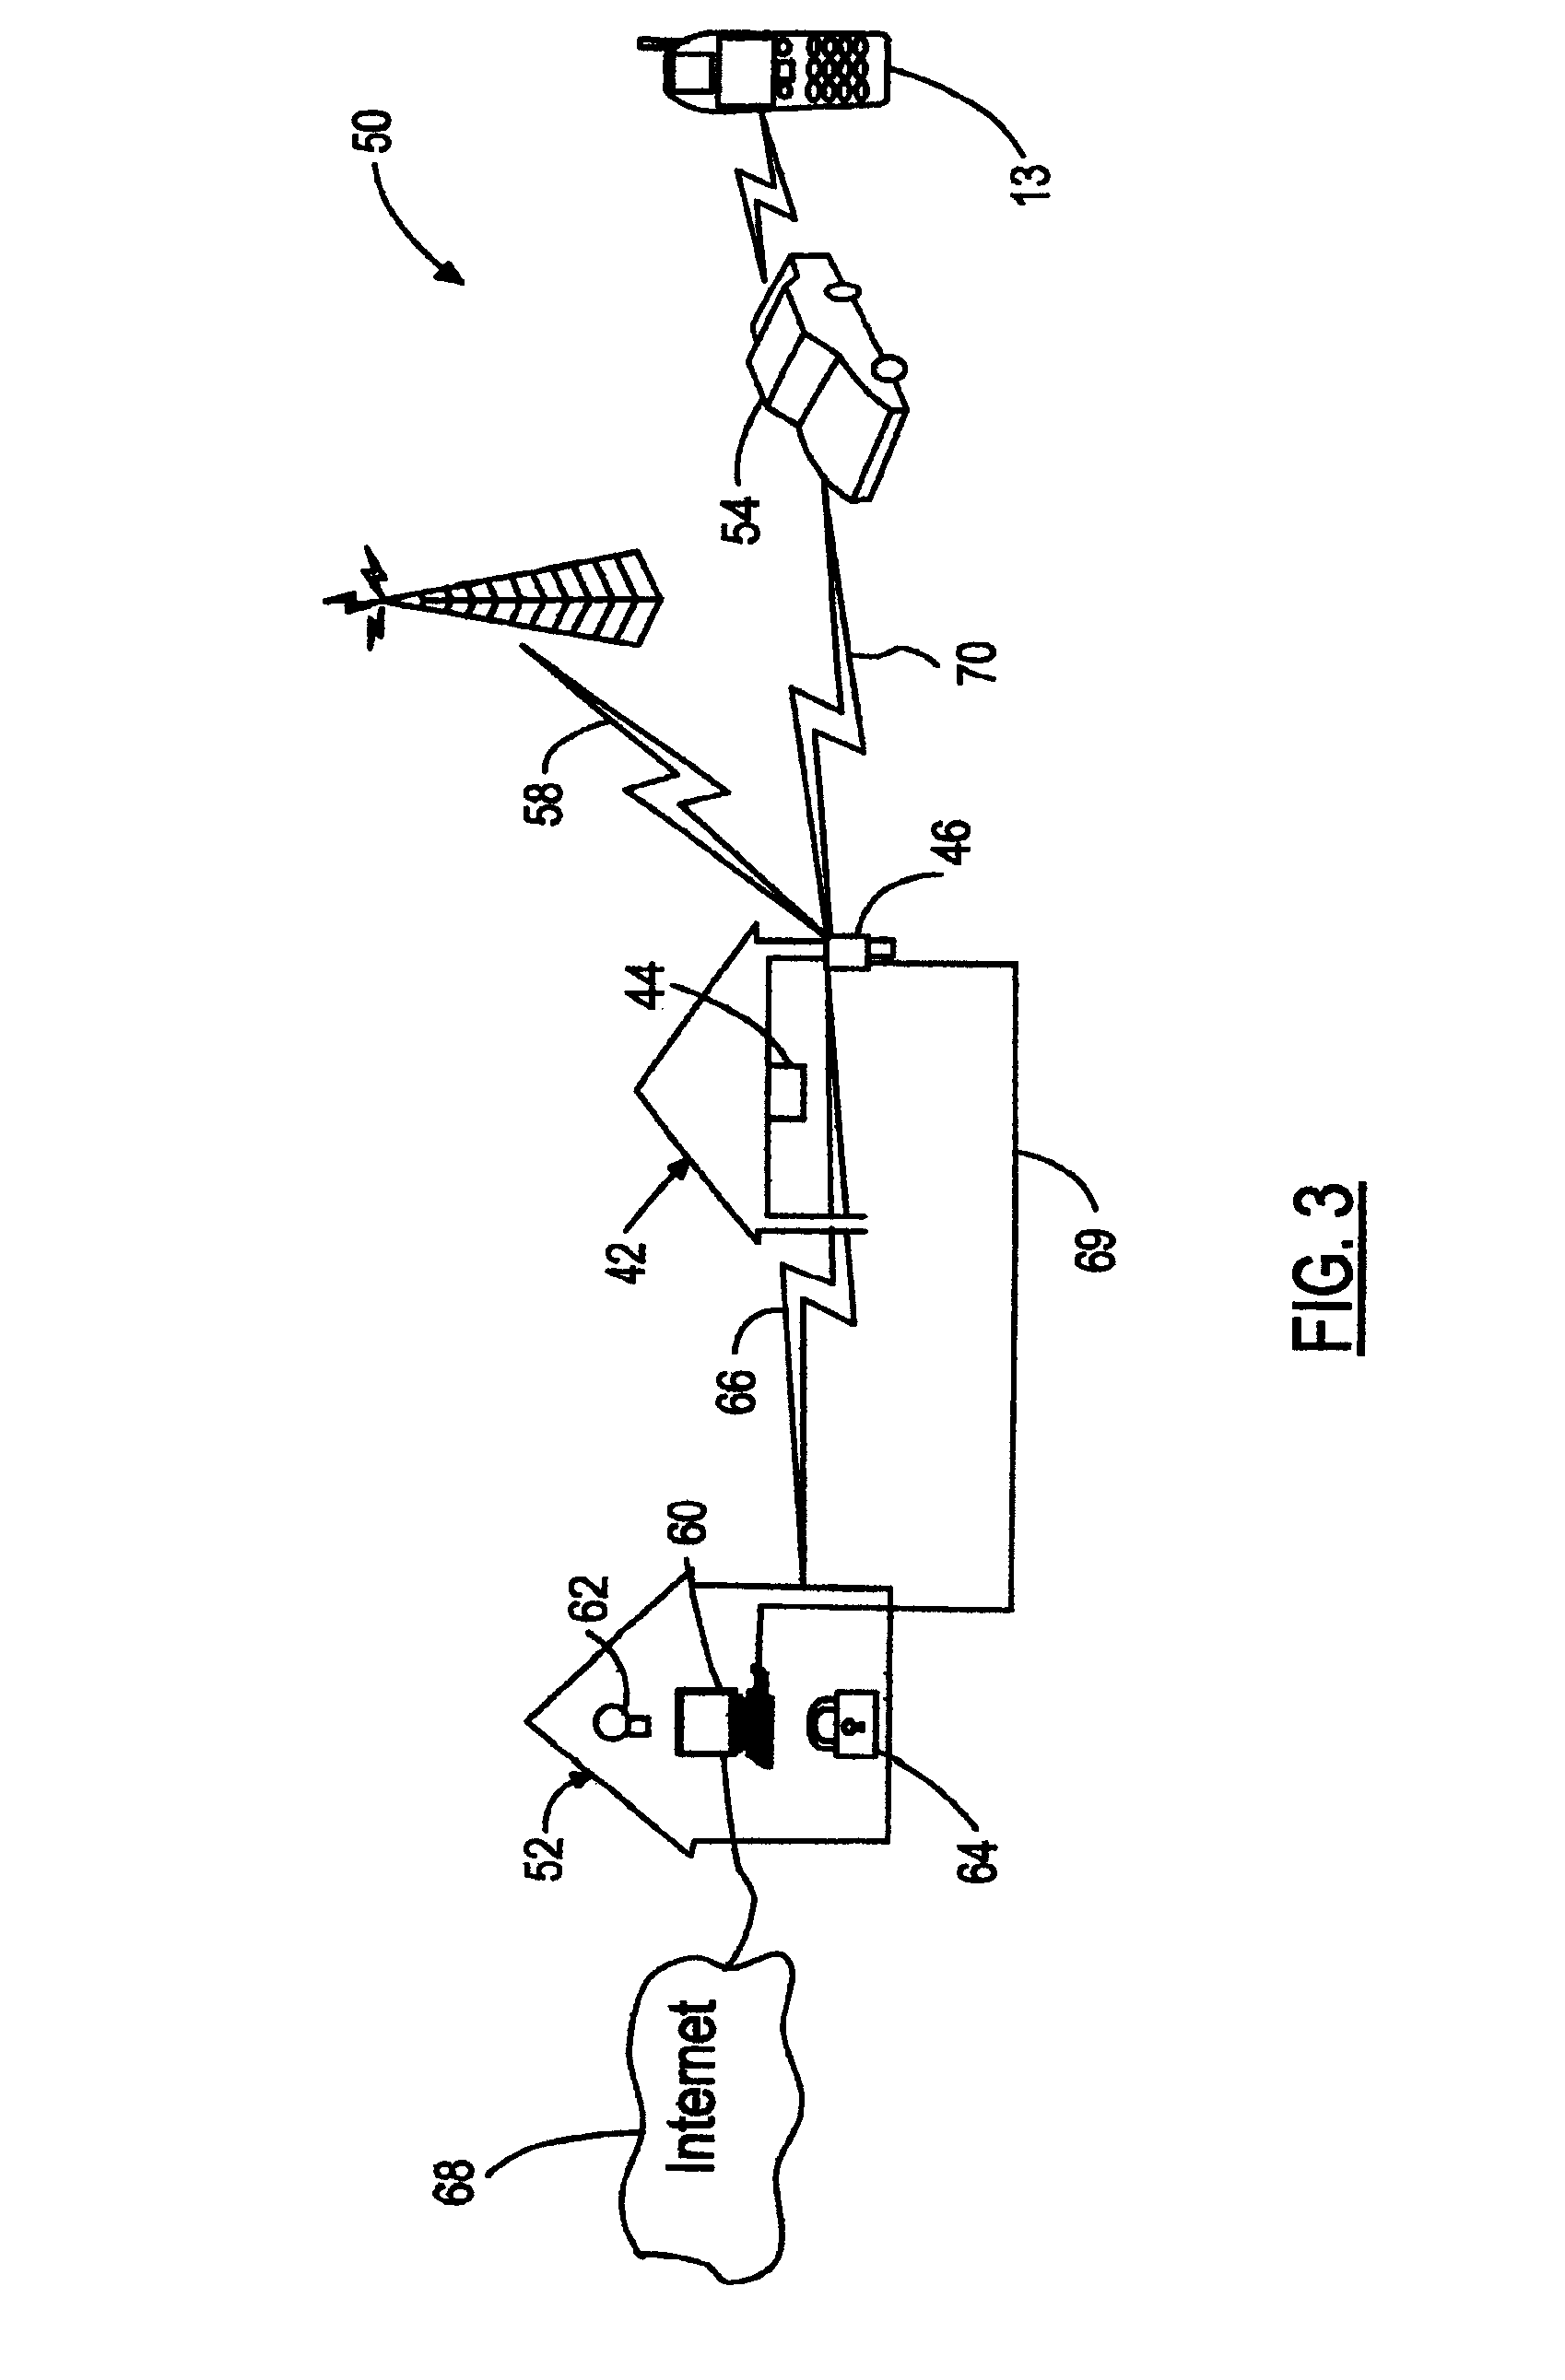 Garage door opener communications gateway module for enabling communications among vehicles, house devices, and telecommunications networks